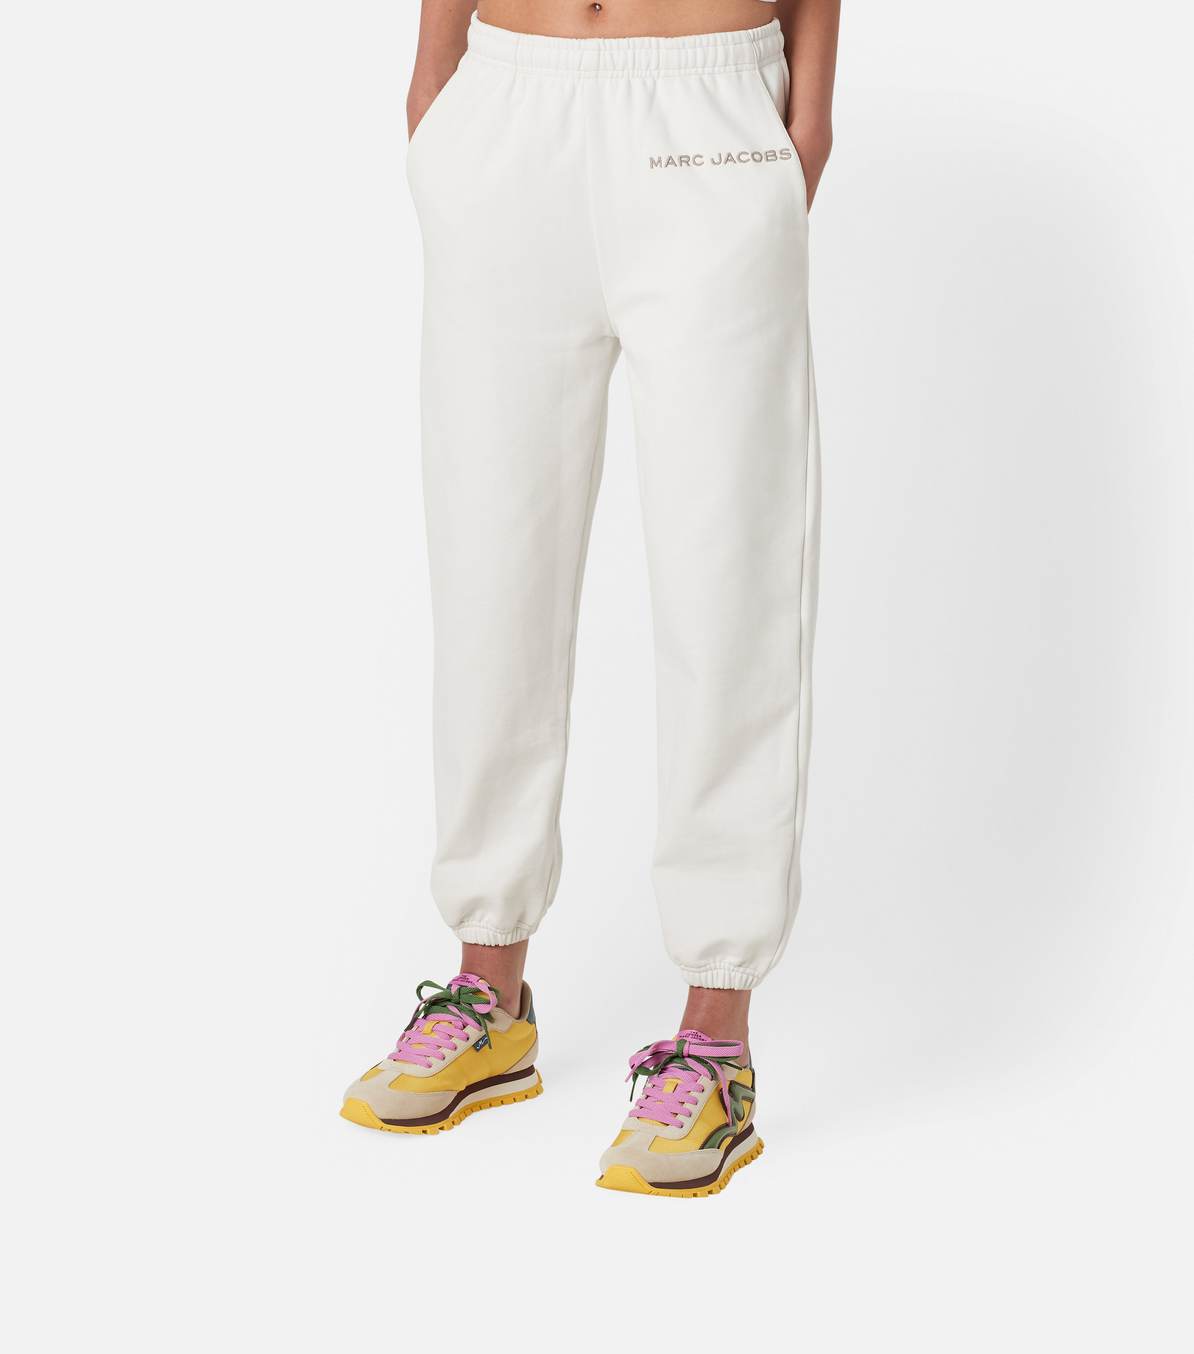 The Sweatpant | Marc Jacobs | Official Site